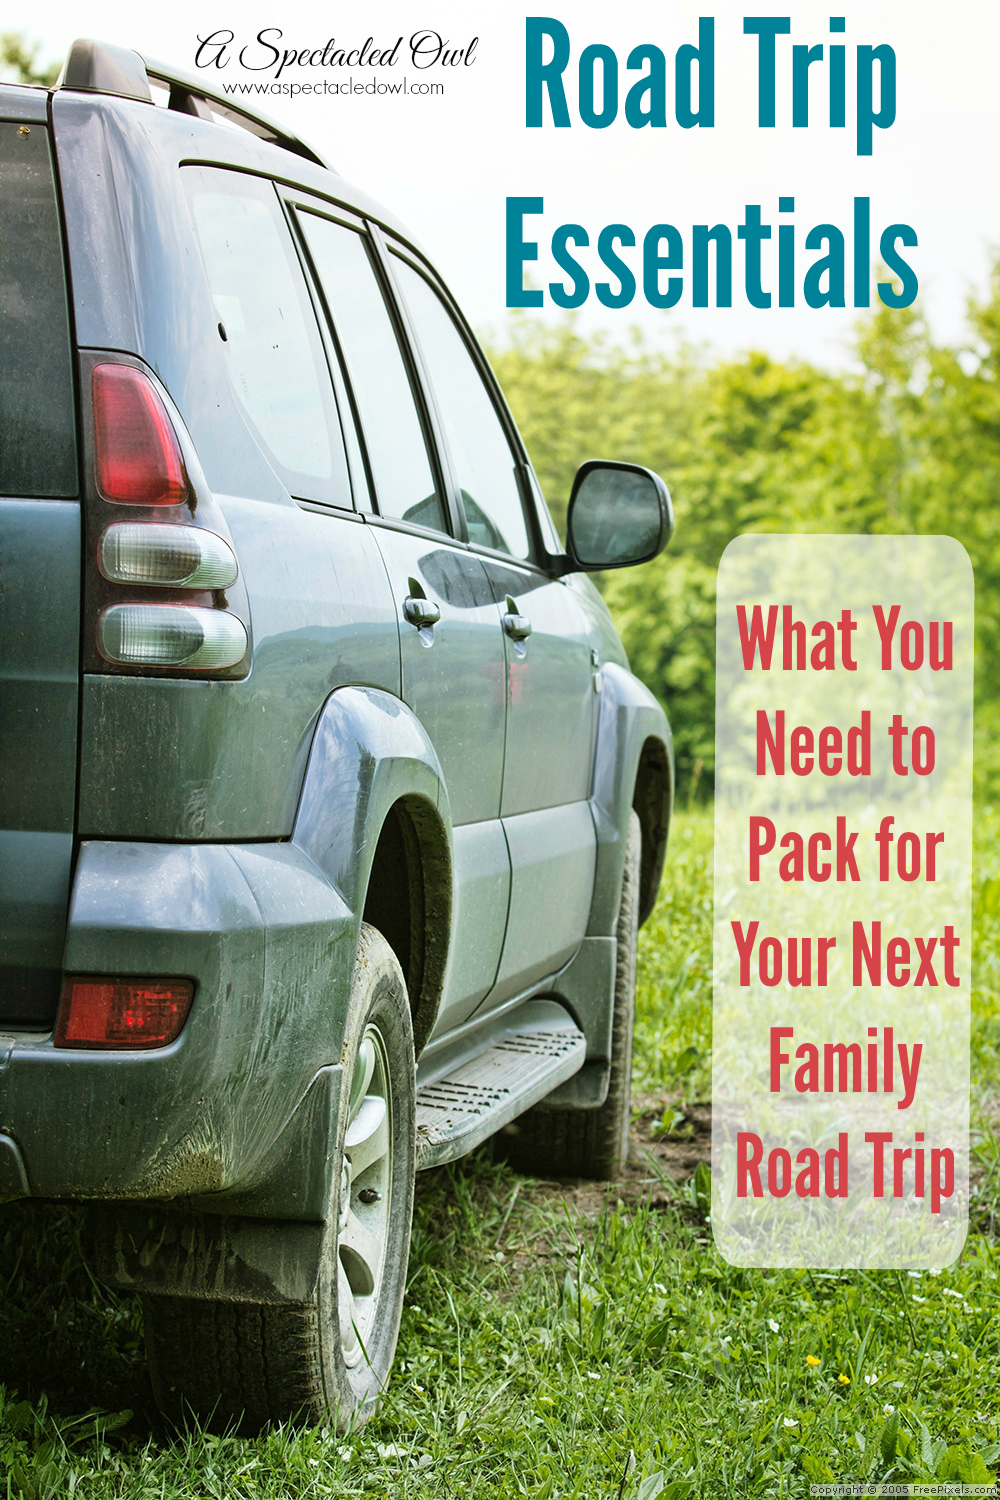 Here is a list of Road Trip Essentials to get you started so you don't forget anything important at home!